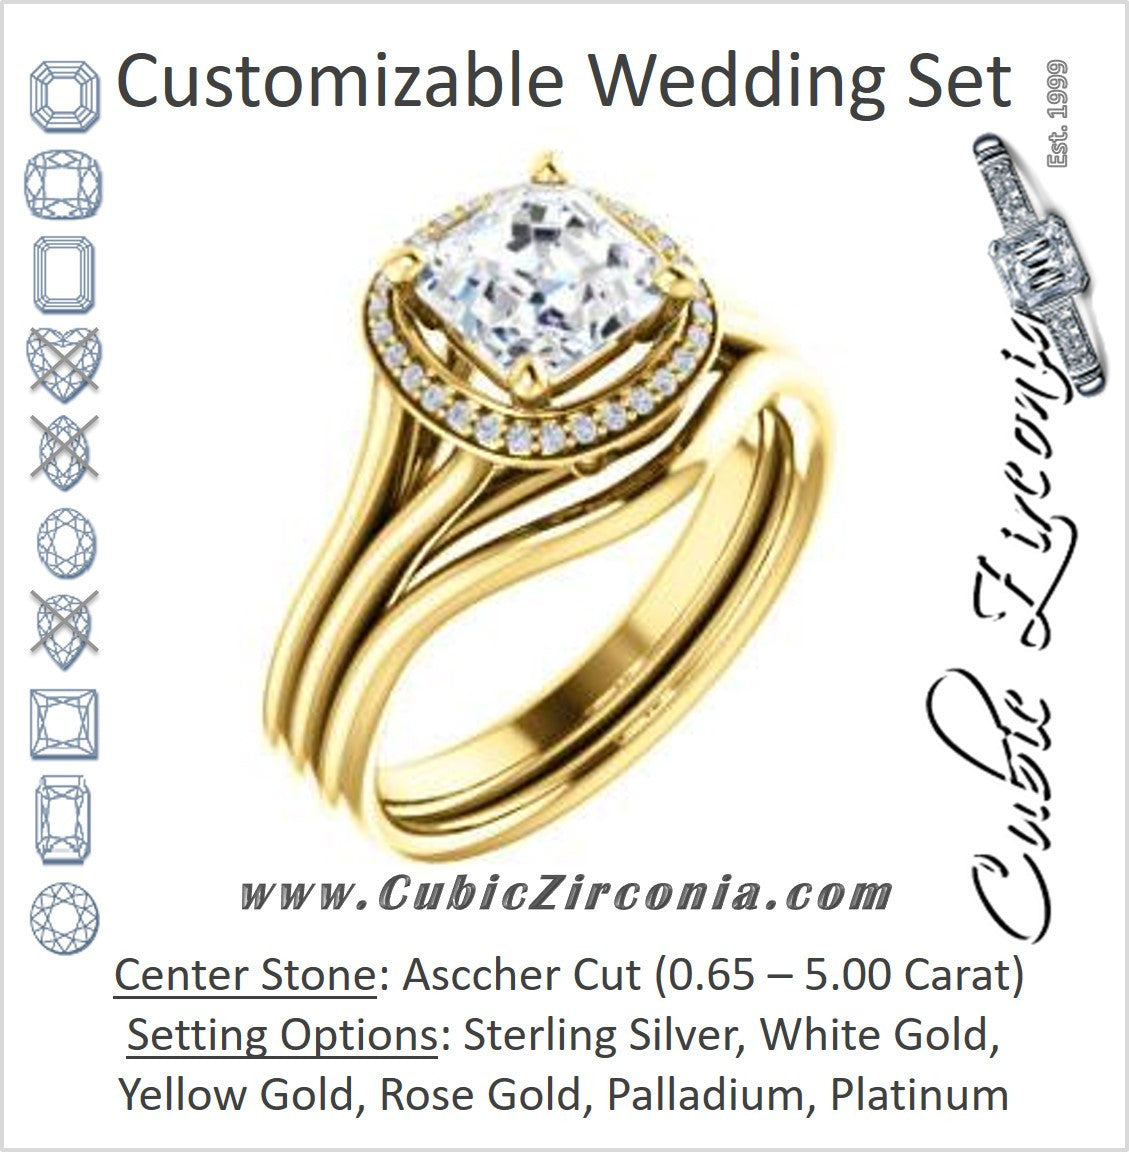 CZ Wedding Set, featuring The Jaci engagement ring (Customizable Cathedral-set Asscher Cut Design with Split-Band and Halo Accents)